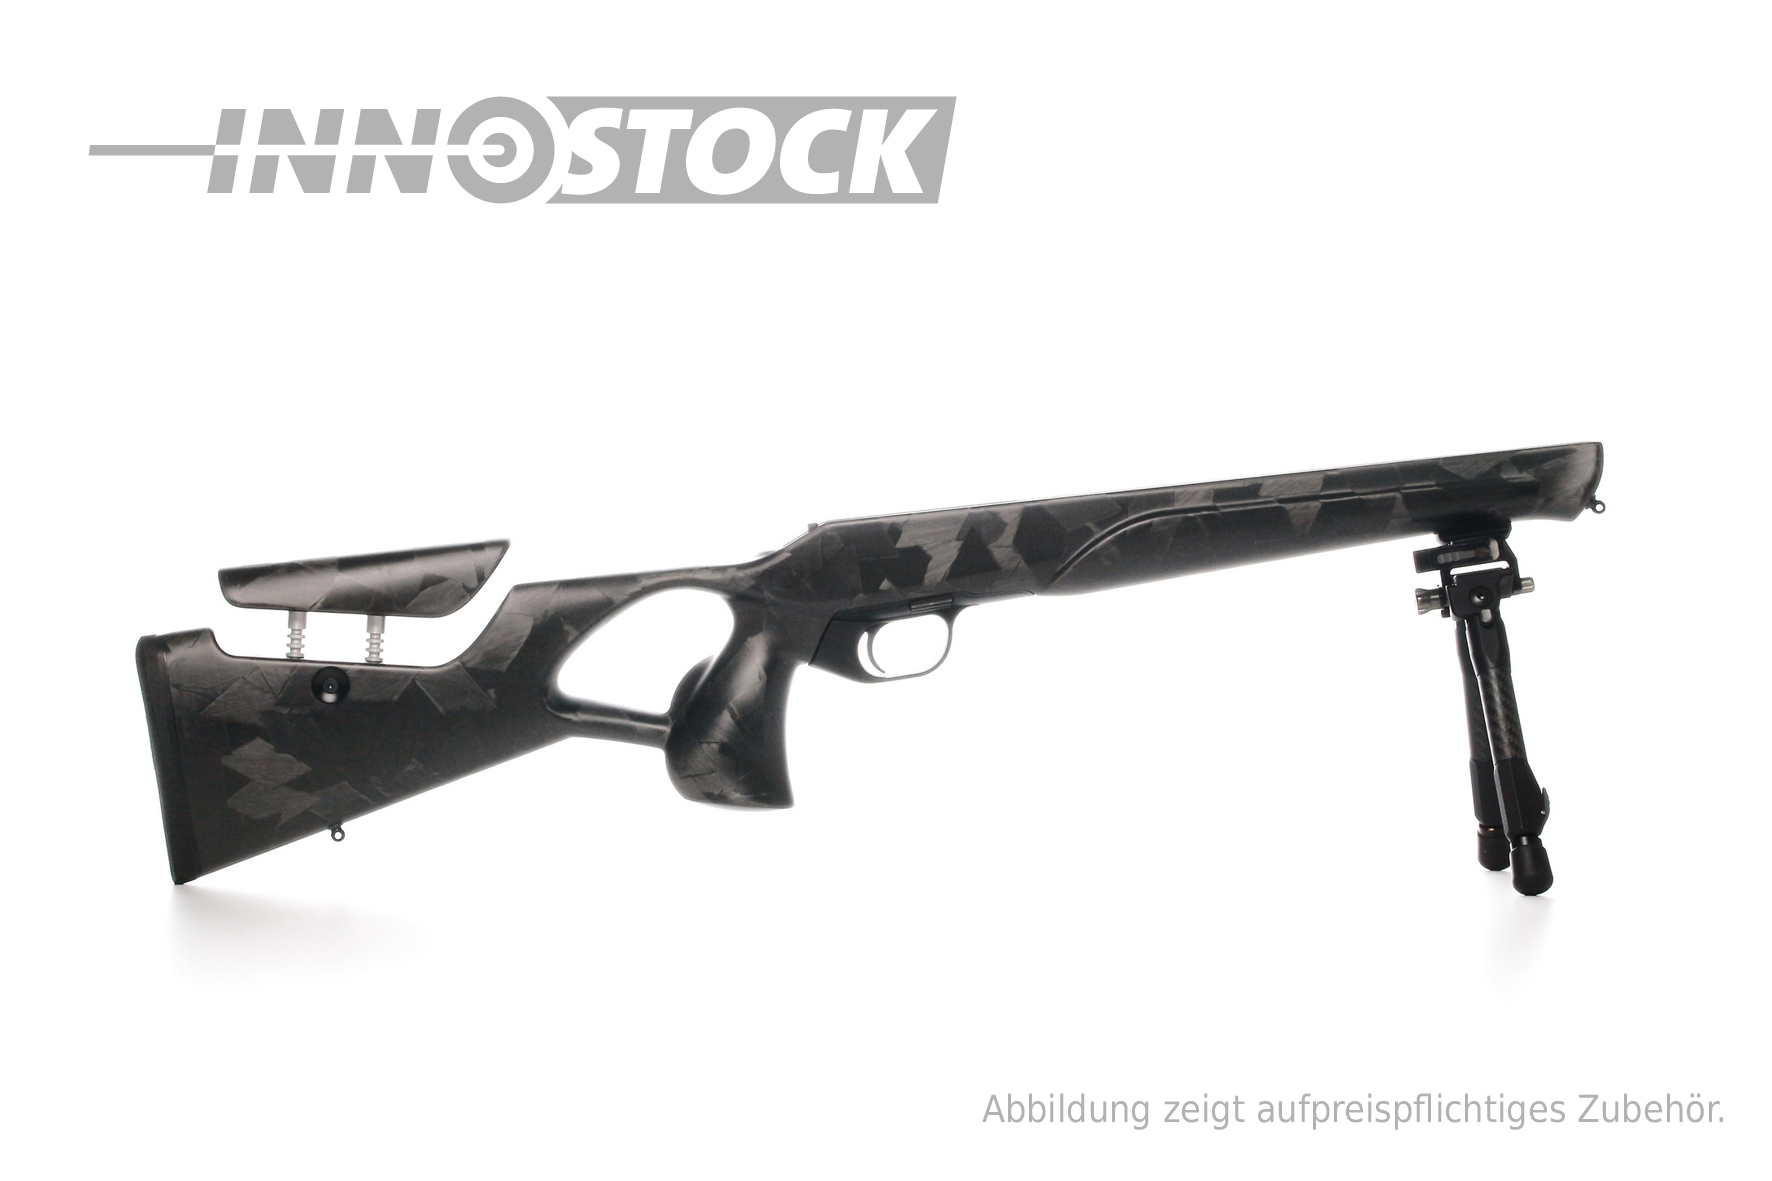 Carbon Stock - M82 - for System Blaser R8 - Hunting Match (22MM) - Carbon Camo - inkl. Spartan Adapter